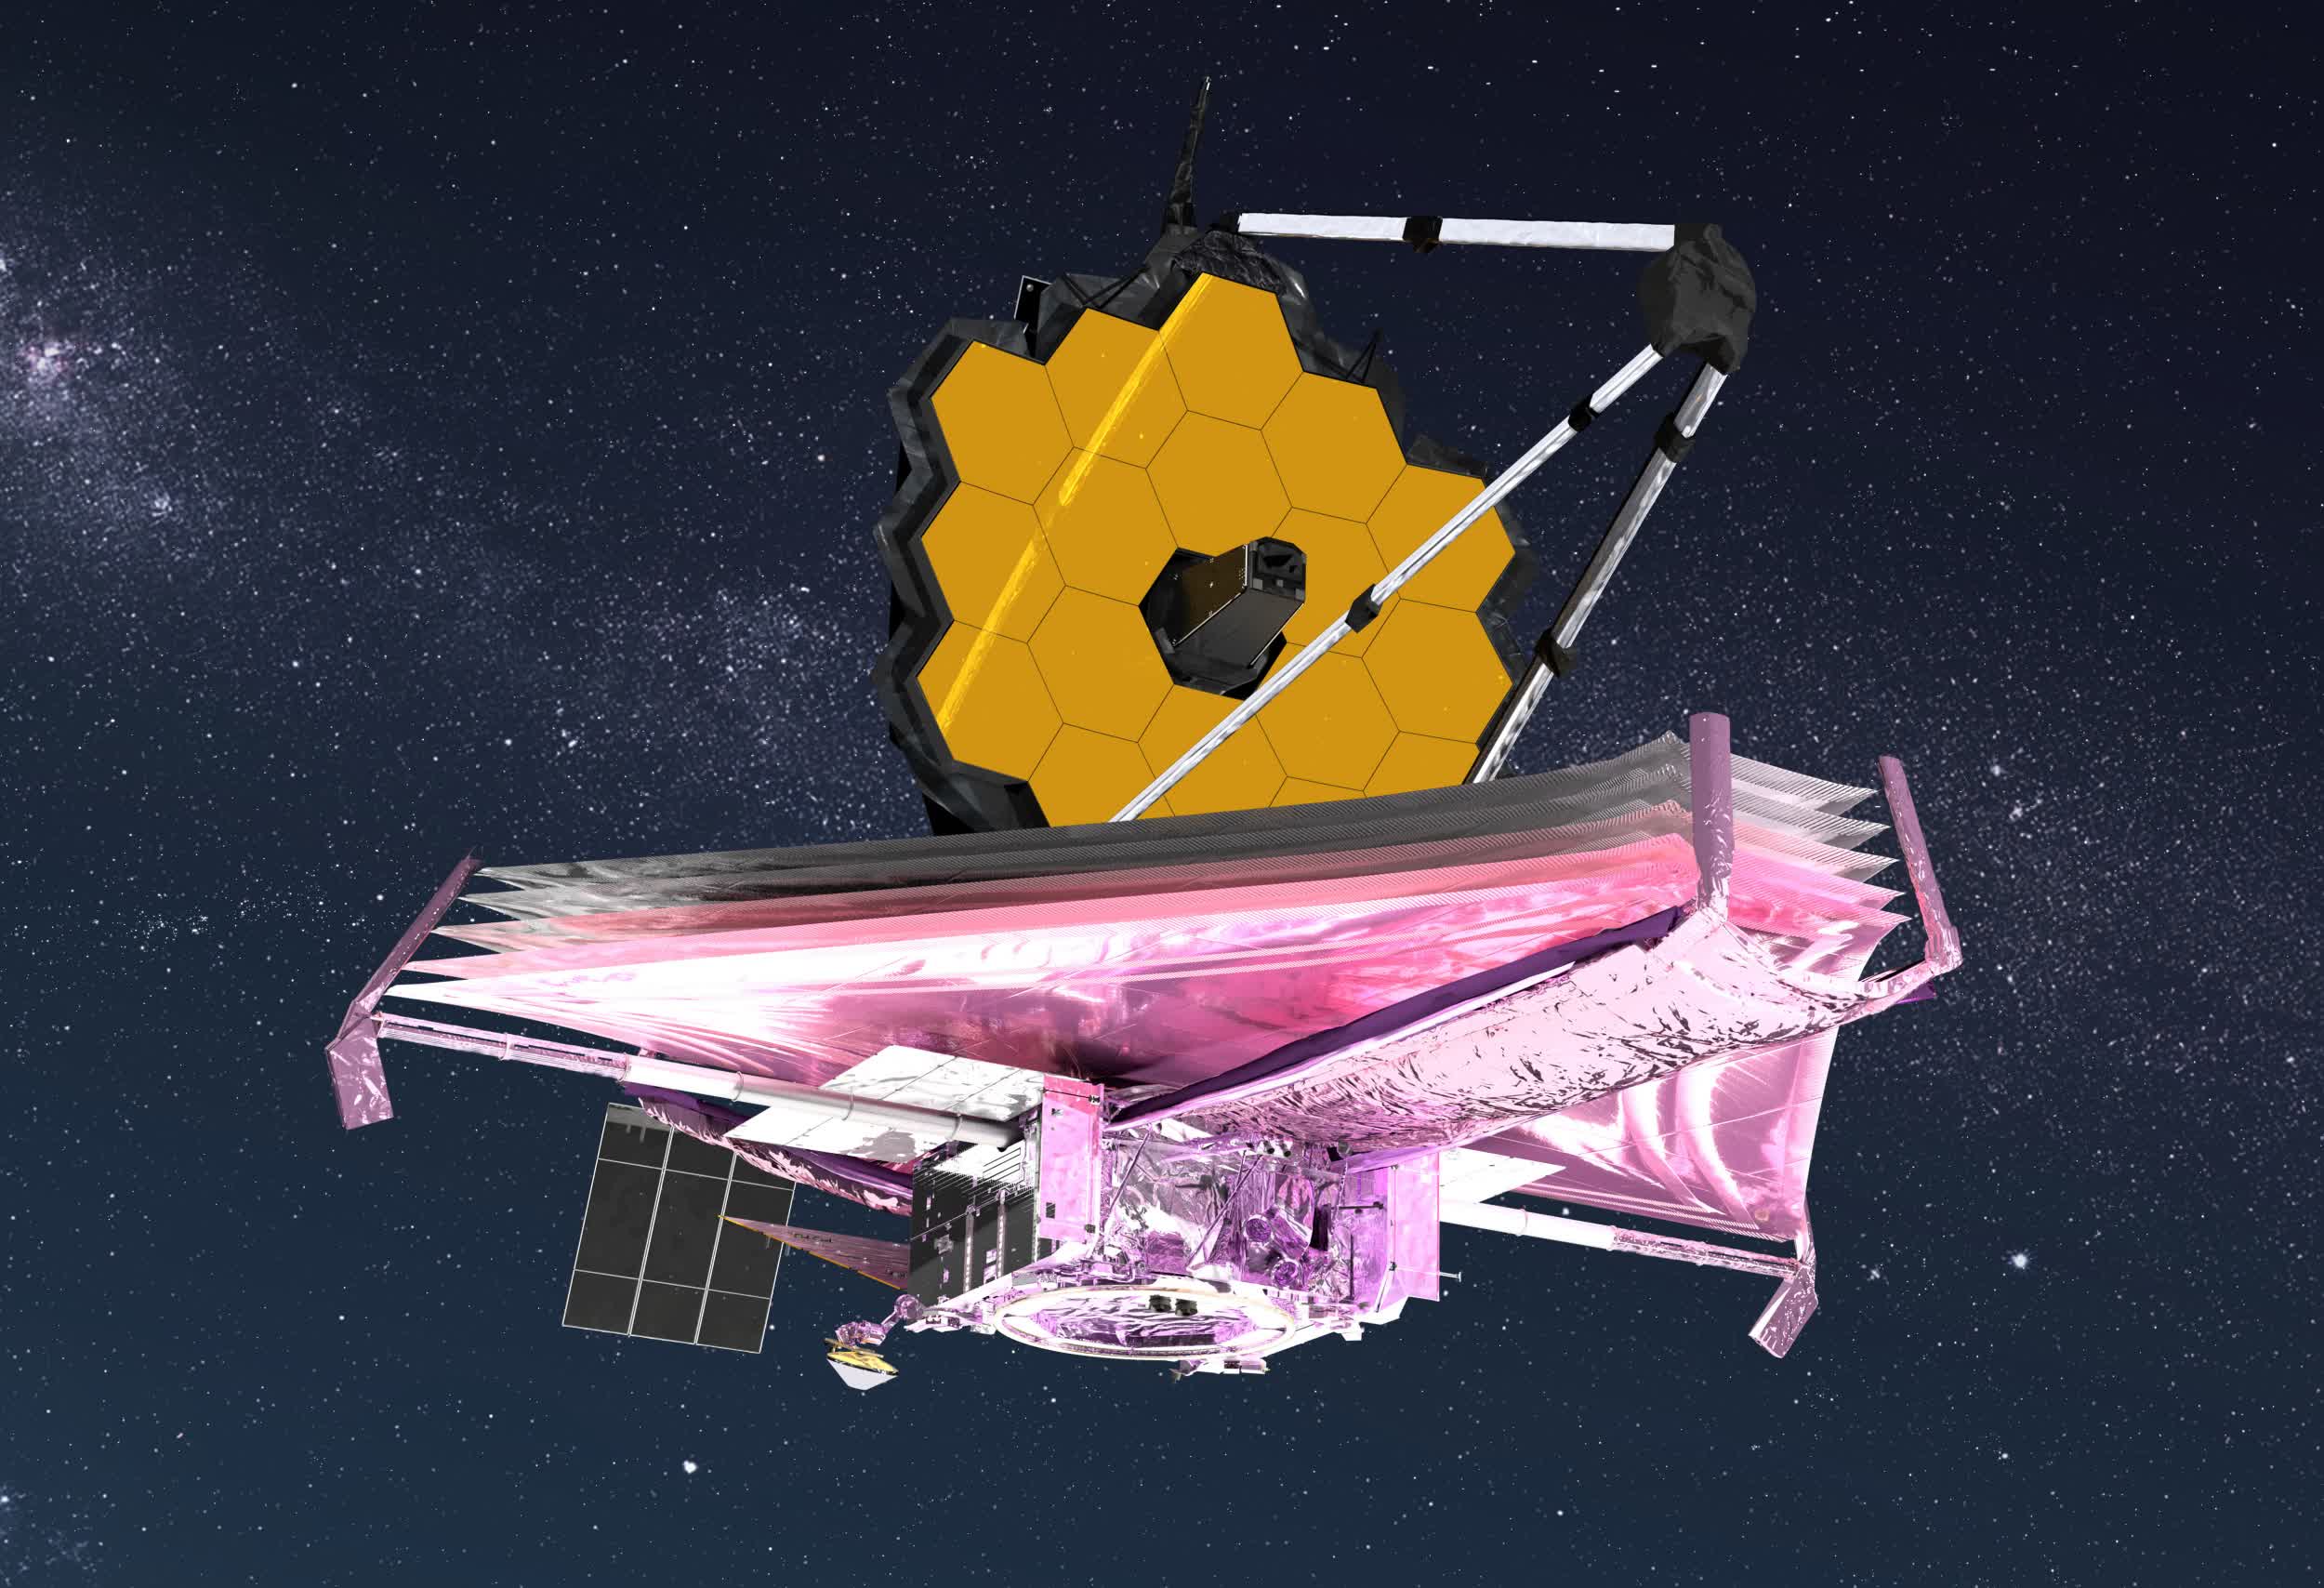 James Webb telescope gets hit by a larger-than-anticipated micrometeoroid